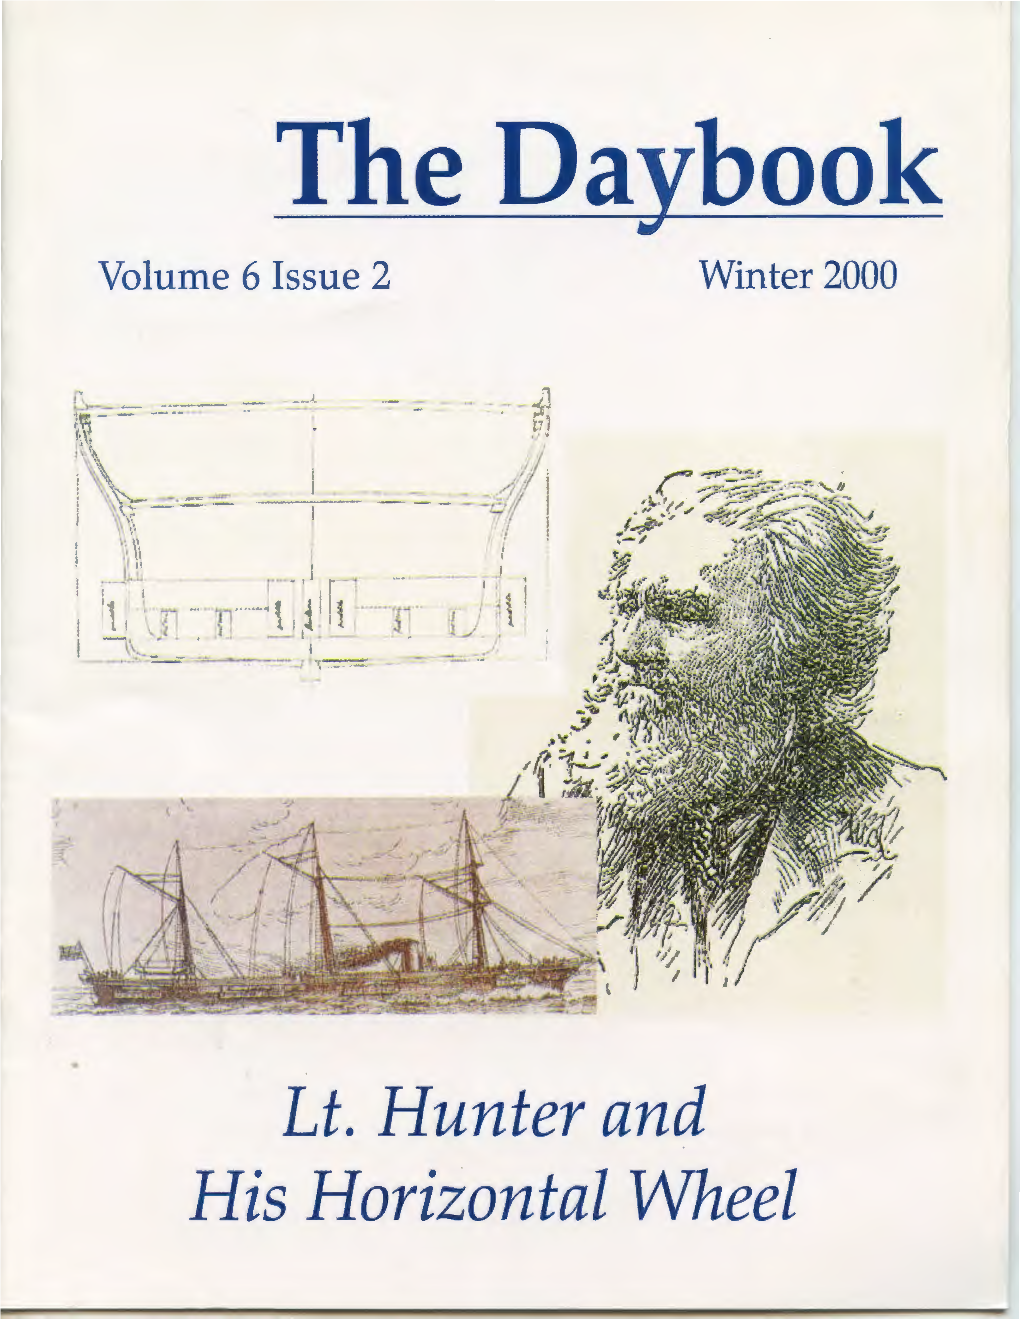 Lt. Hunter and His Horizontal Wheel the Daybook Volume 6 Issue 2 Winter 2000 in This Issue